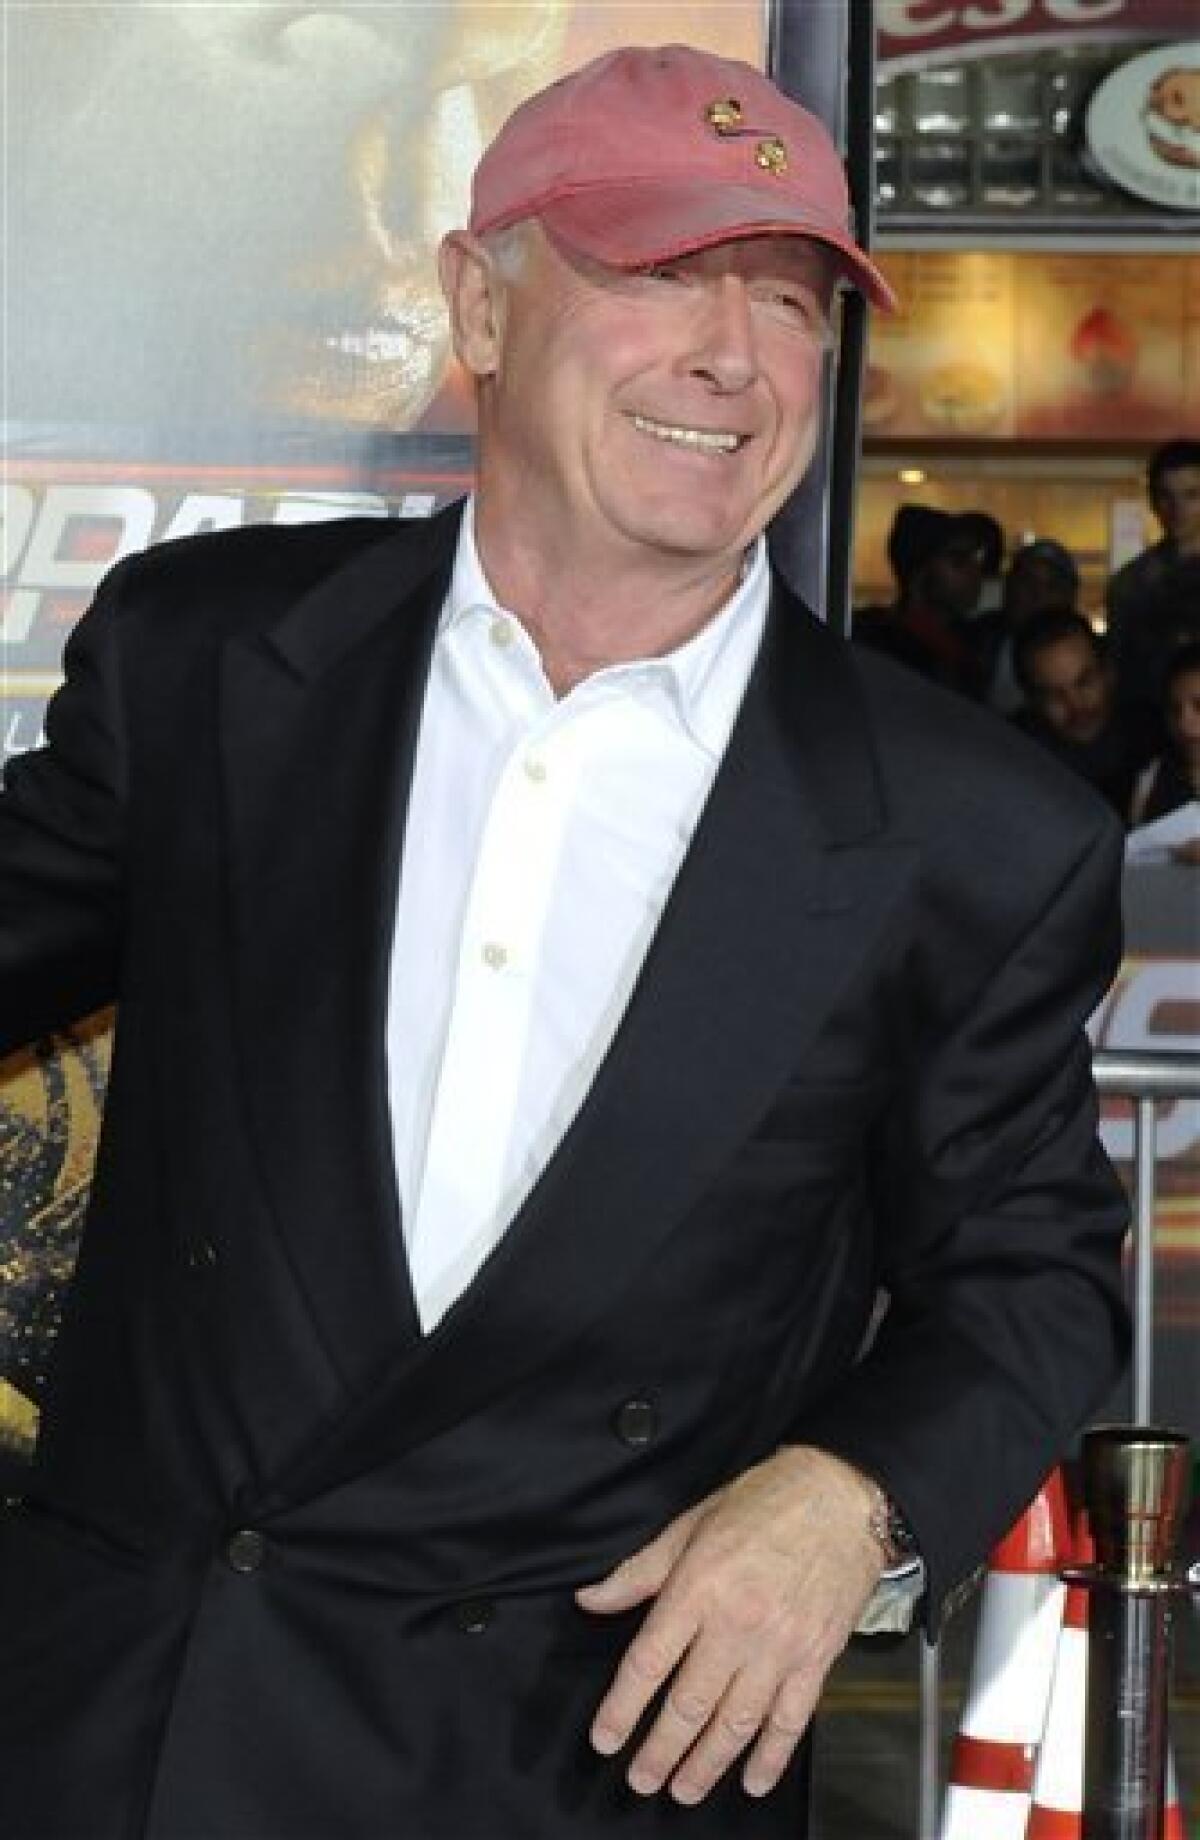 FILE - In this Oct. 26, 2010 file photo, director Tony Scott arrives at the premiere of "Unstoppable" in Los Angeles. Authorities say Scott died after jumping off a bridge in Los Angeles on Sunday, Aug. 19, 2012. (AP Photo/Gus Ruelas, File)